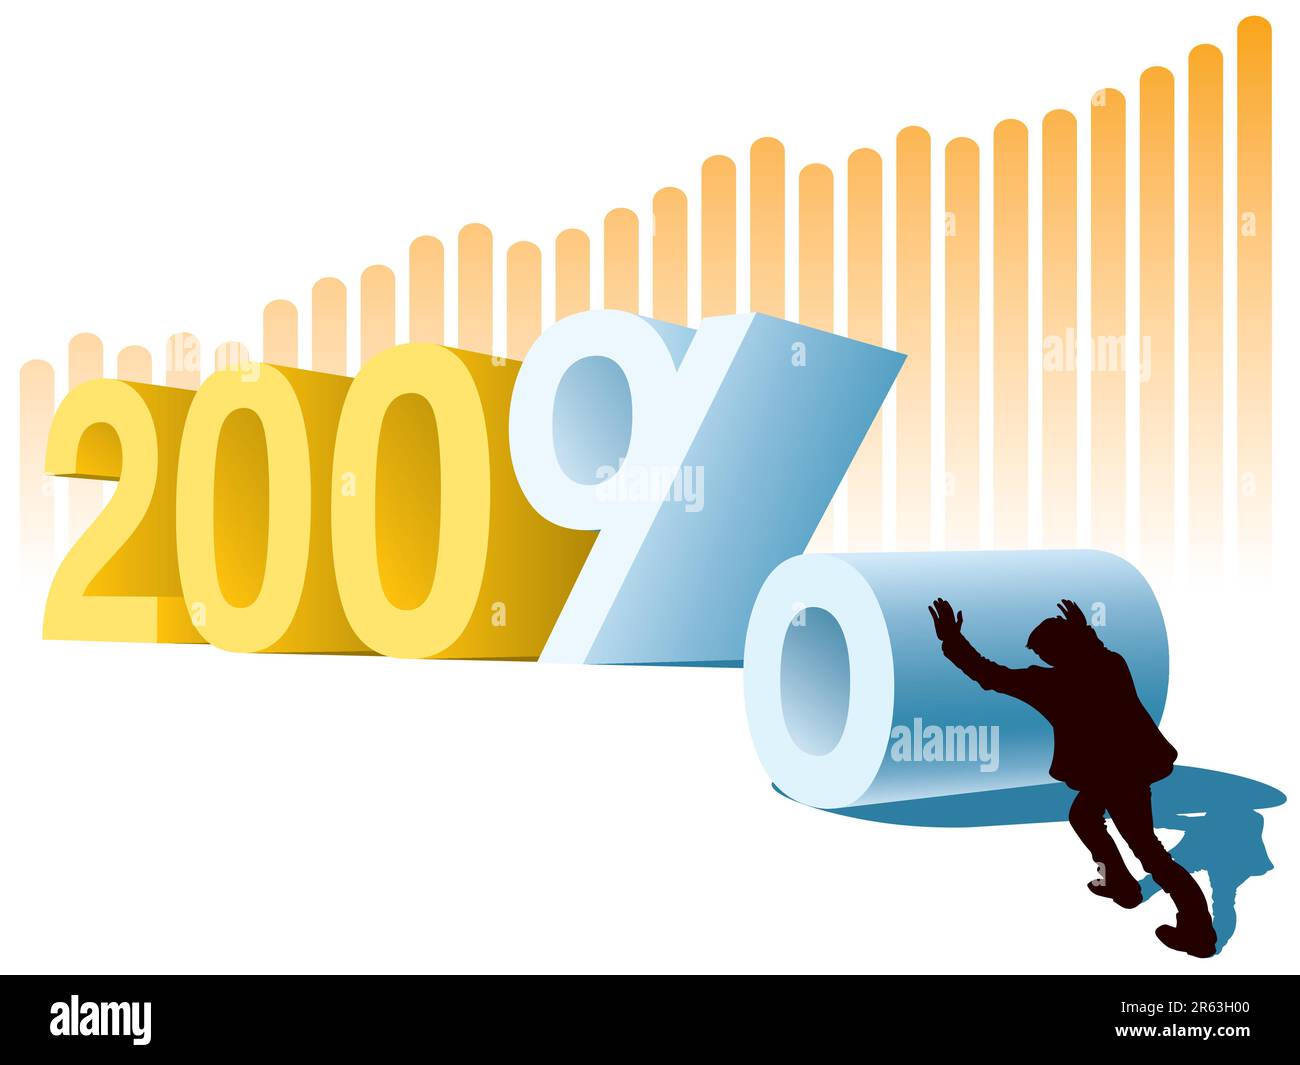 New Year or two hundred percent profit, conceptual business illustration. Stock Vector